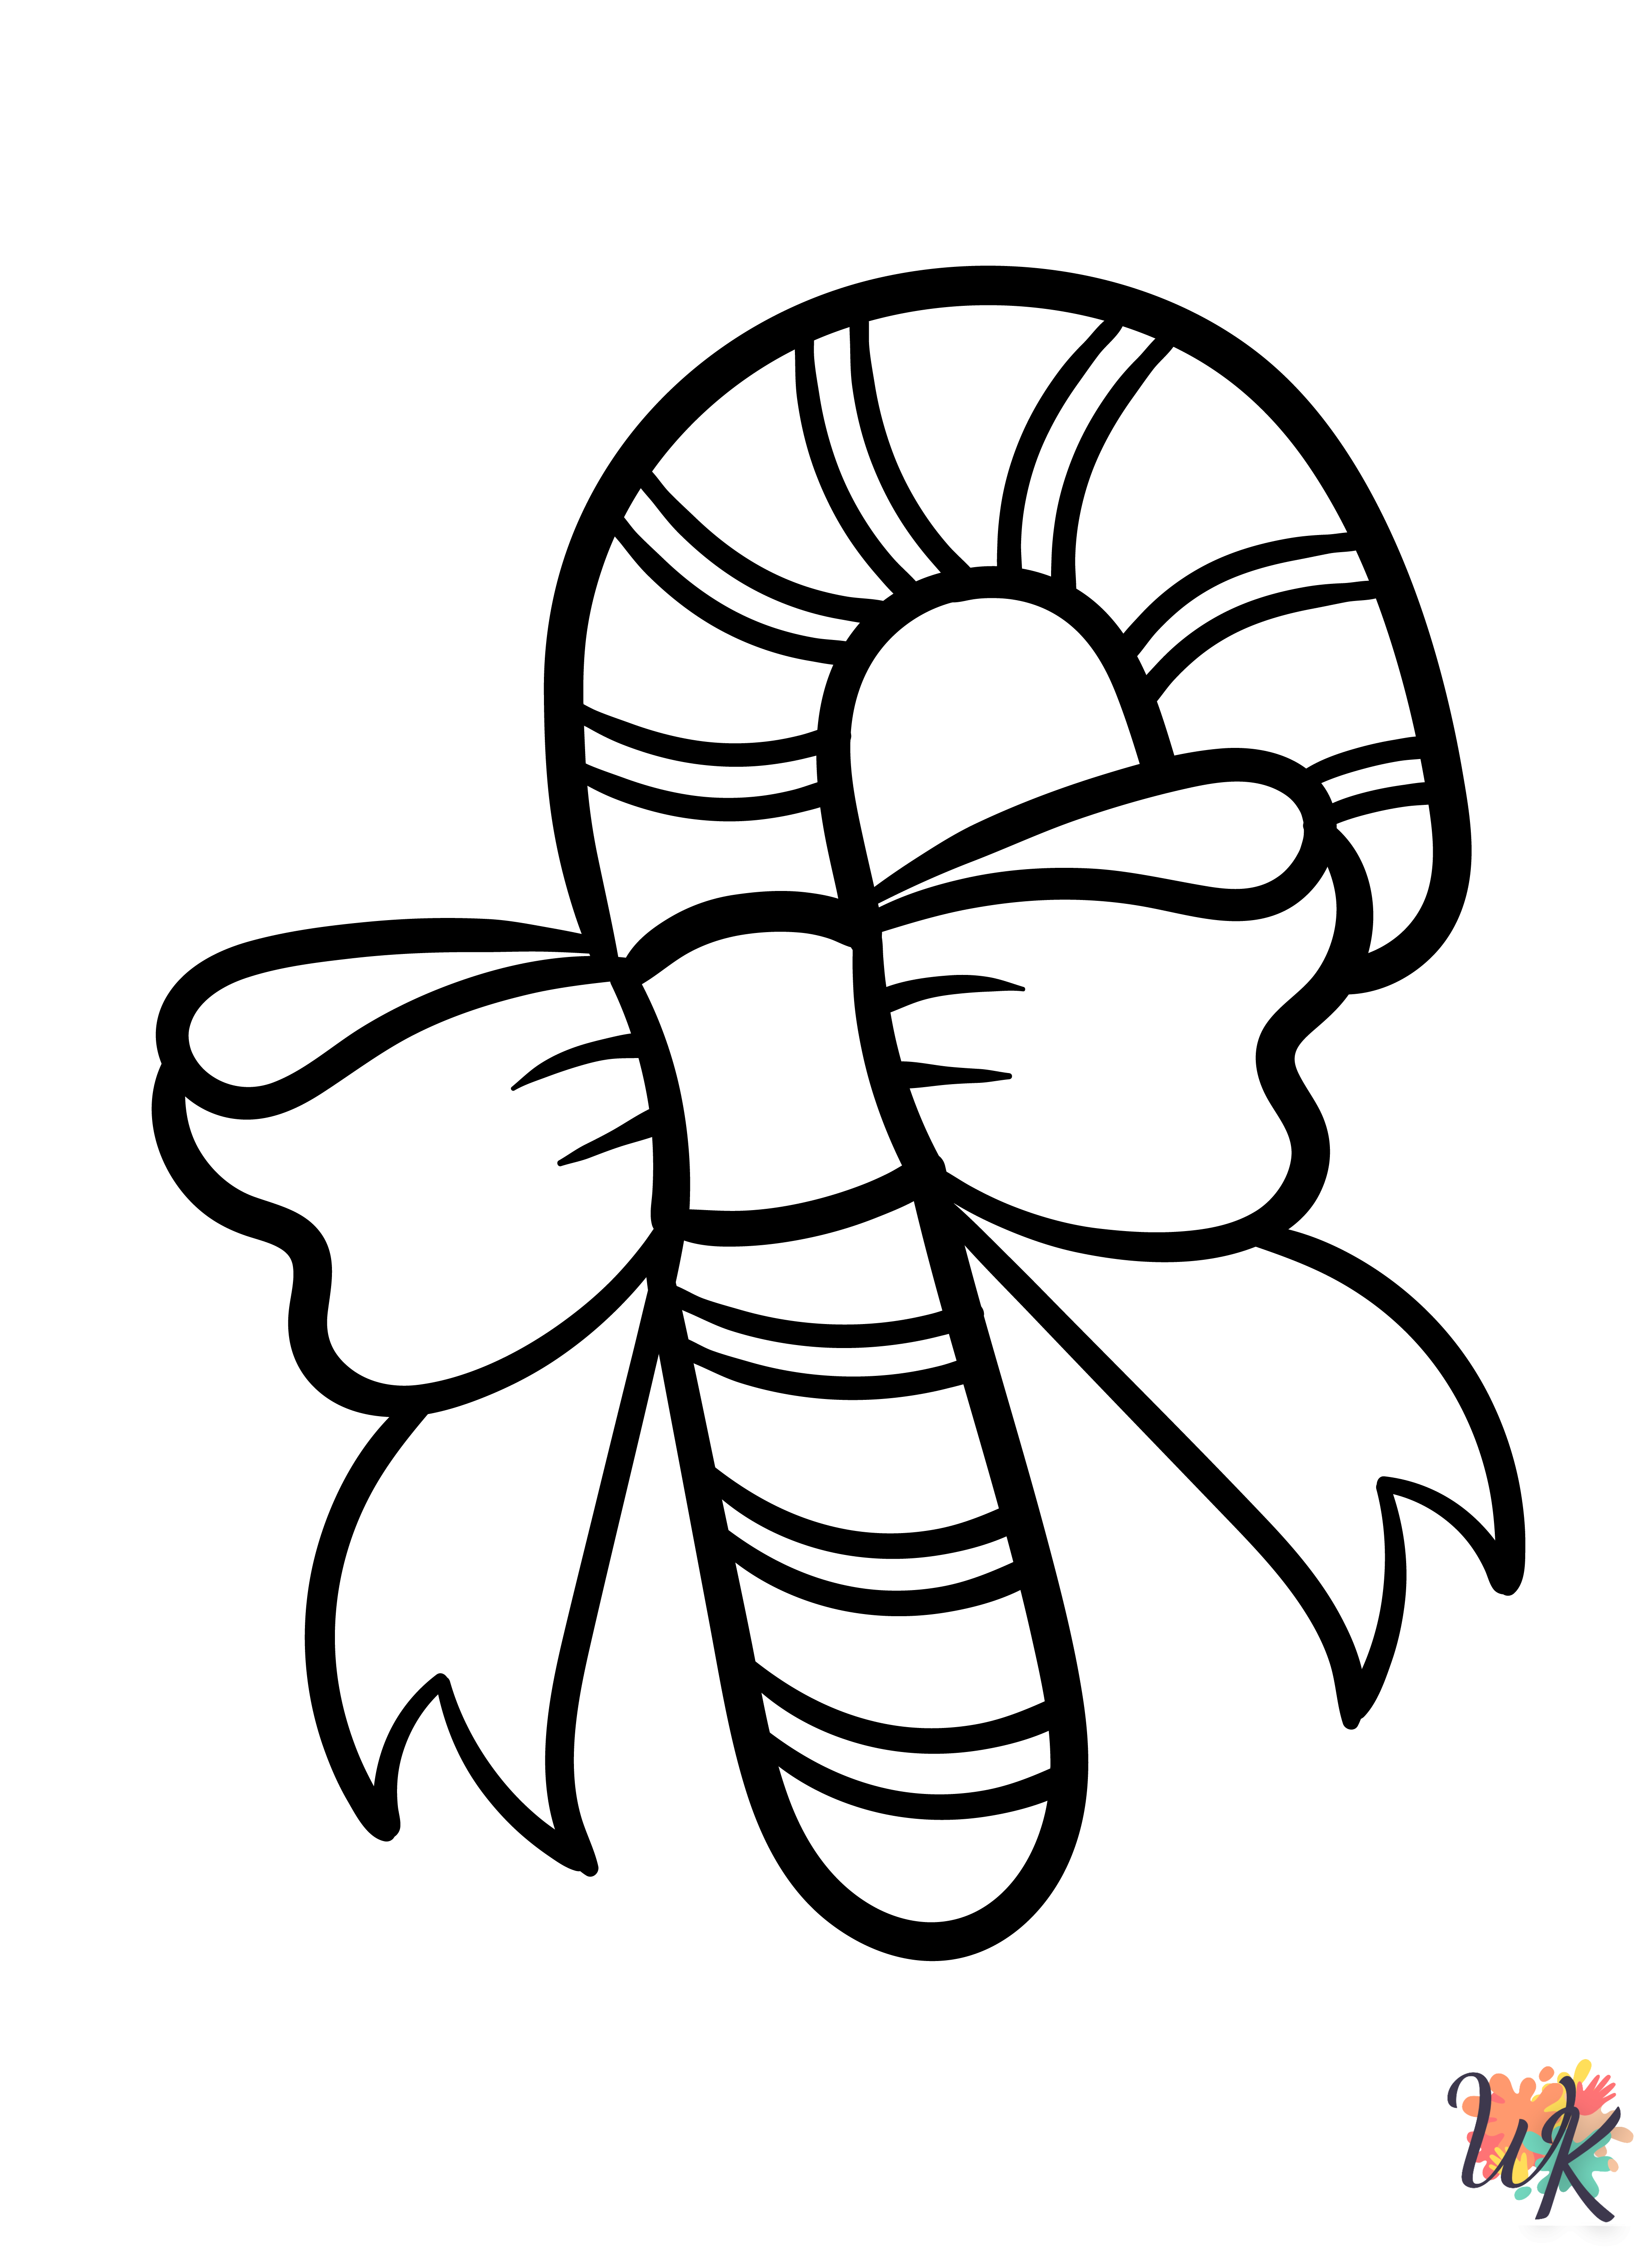 Candy Cane ornaments coloring pages